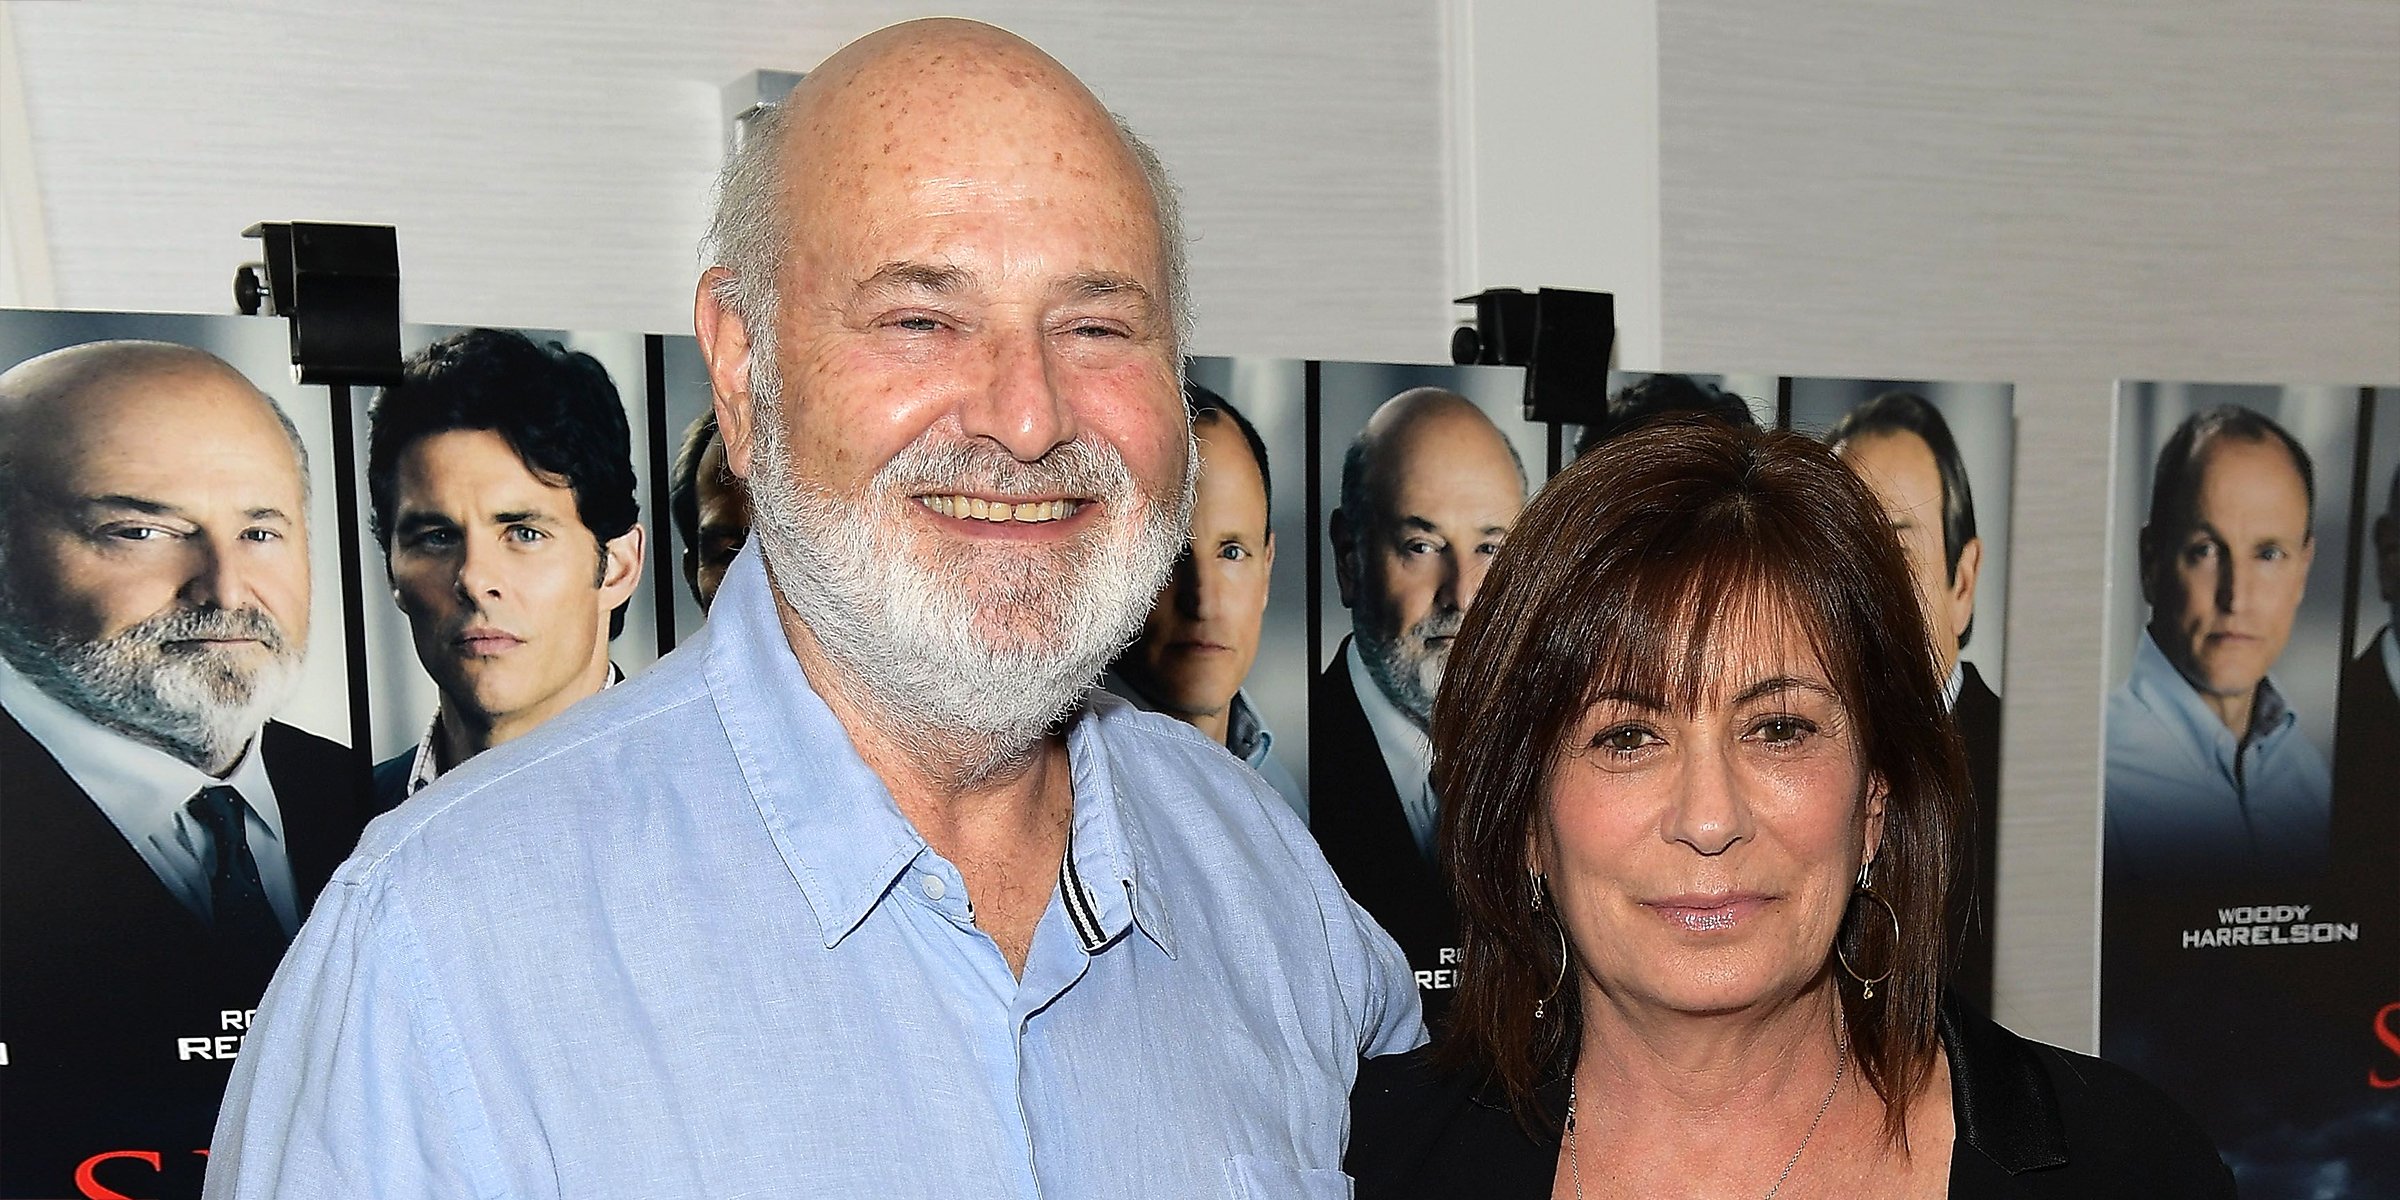 Rob Reiner and his wife Michele Singer | Source: Getty Images